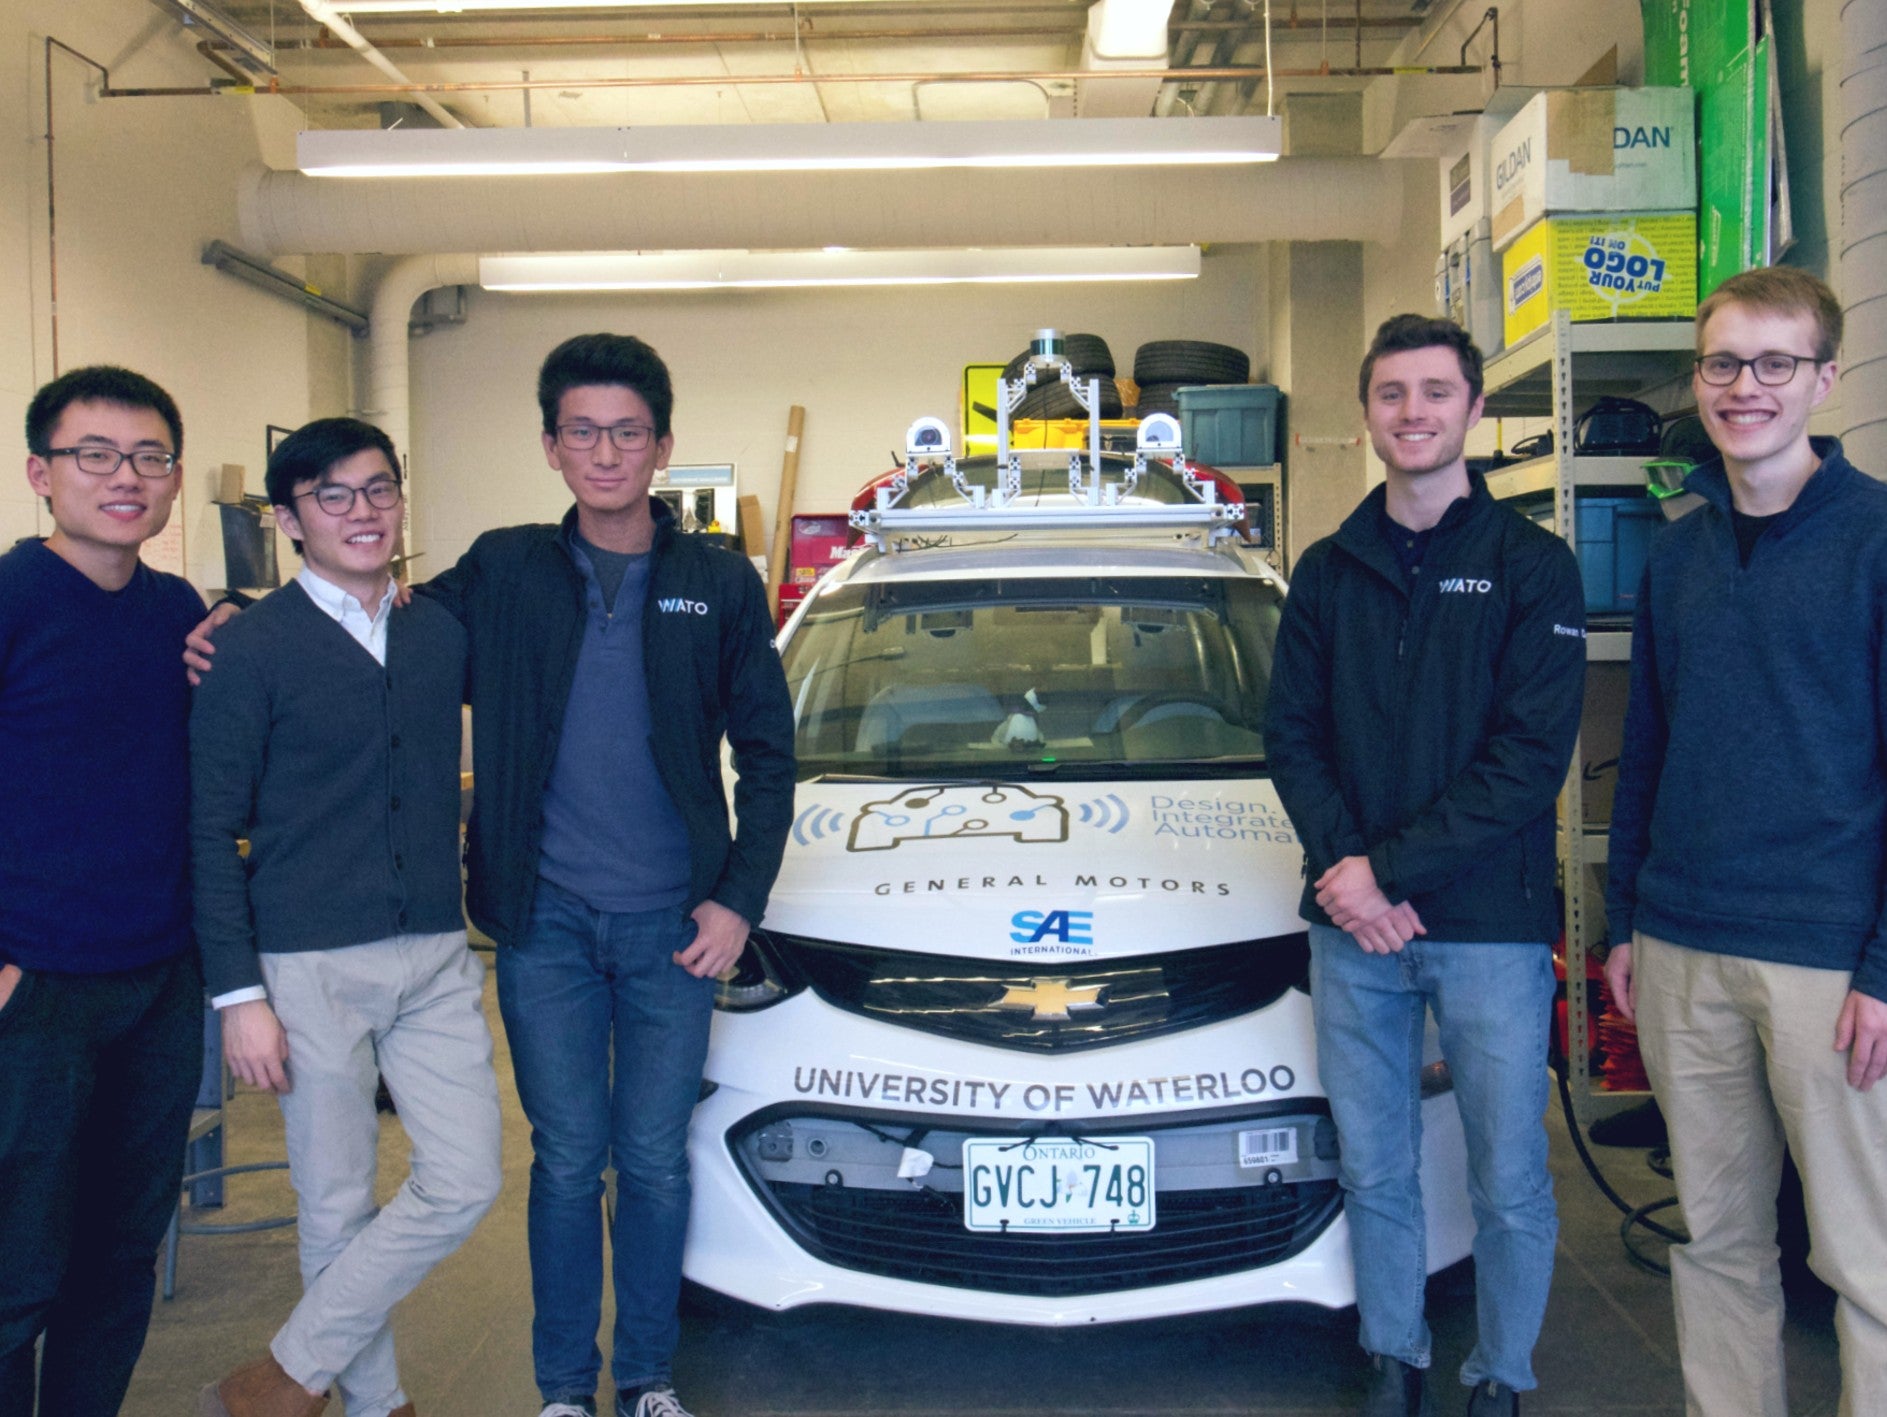 Five members of the WATonomous team stand in front of the vehicle